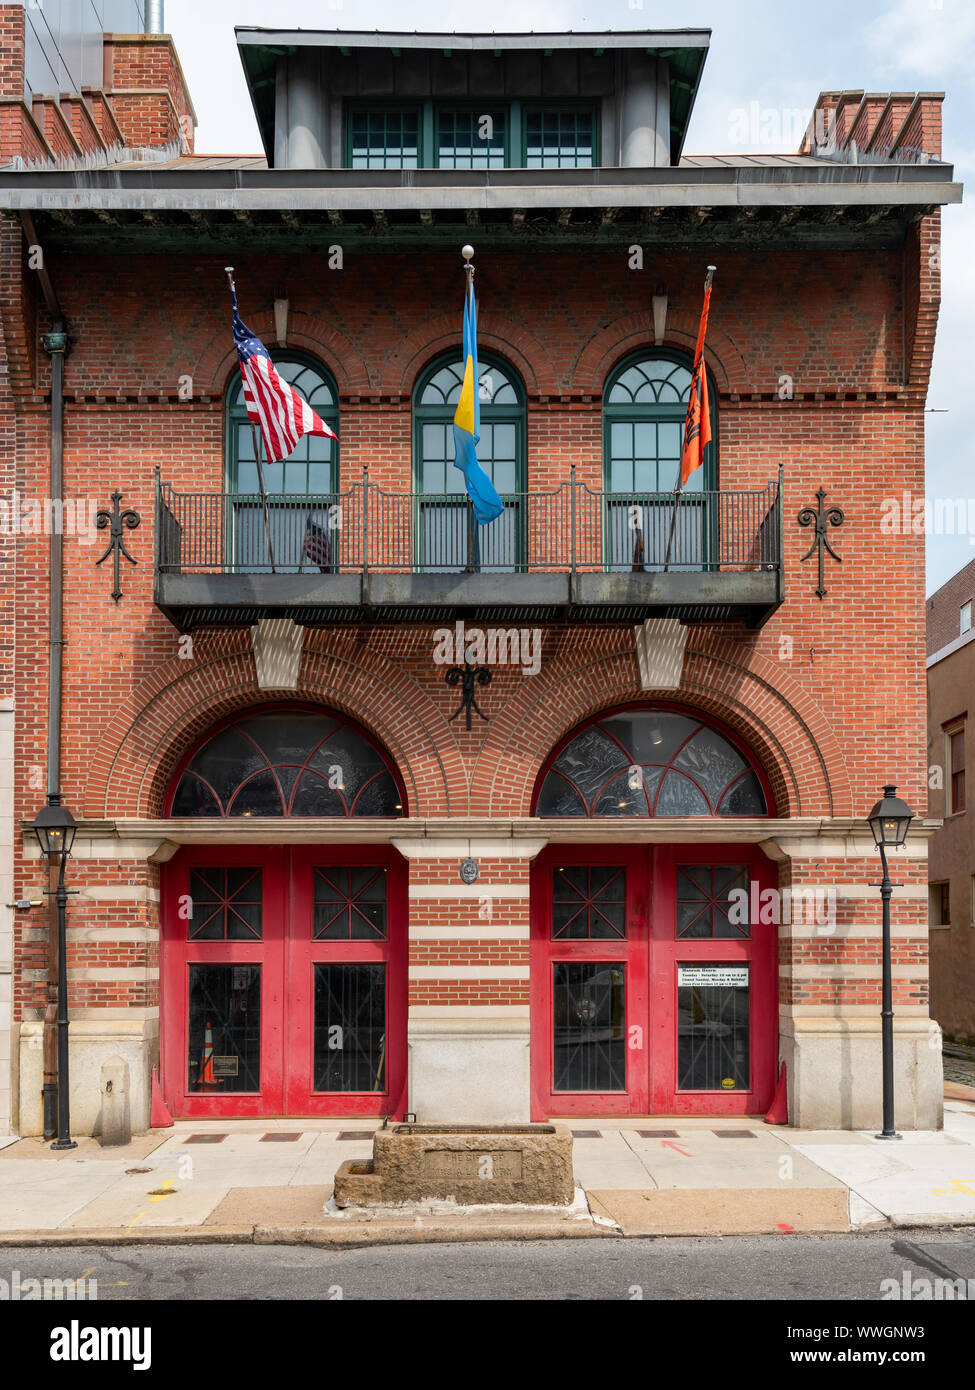 Fireman's Hall, the restored 1902 firehouse at 147 N 2nd St, traces its history back to Benjamin Franklin. It is now a museum. Stock Photo